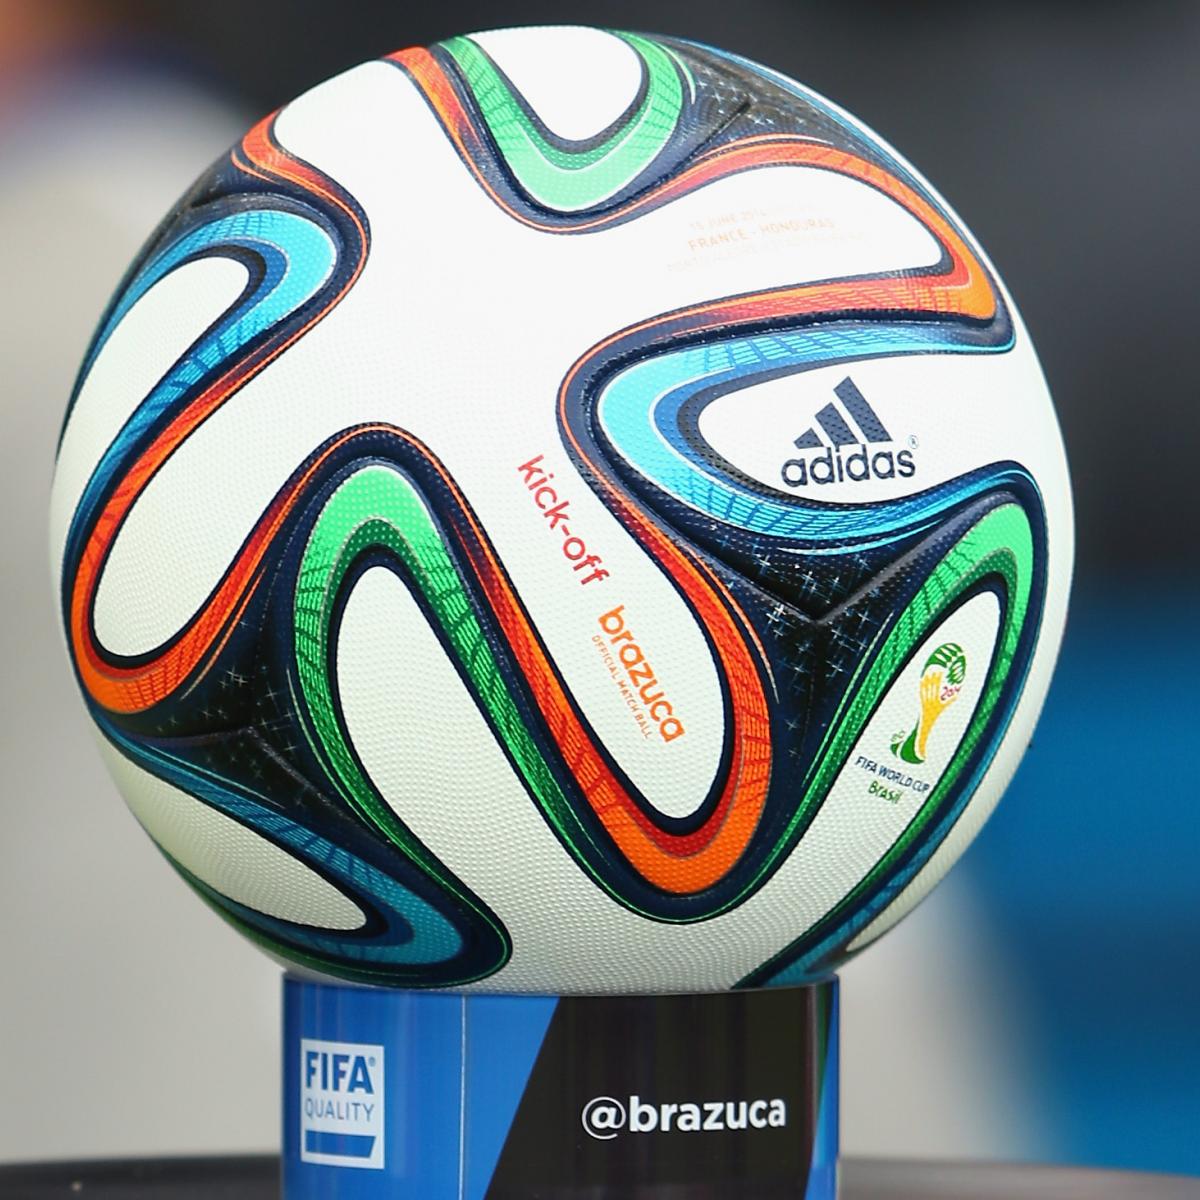 Adidas Brazuca 2014 World Cup Official Match Ball Unboxing + Overview -  video Dailymotion